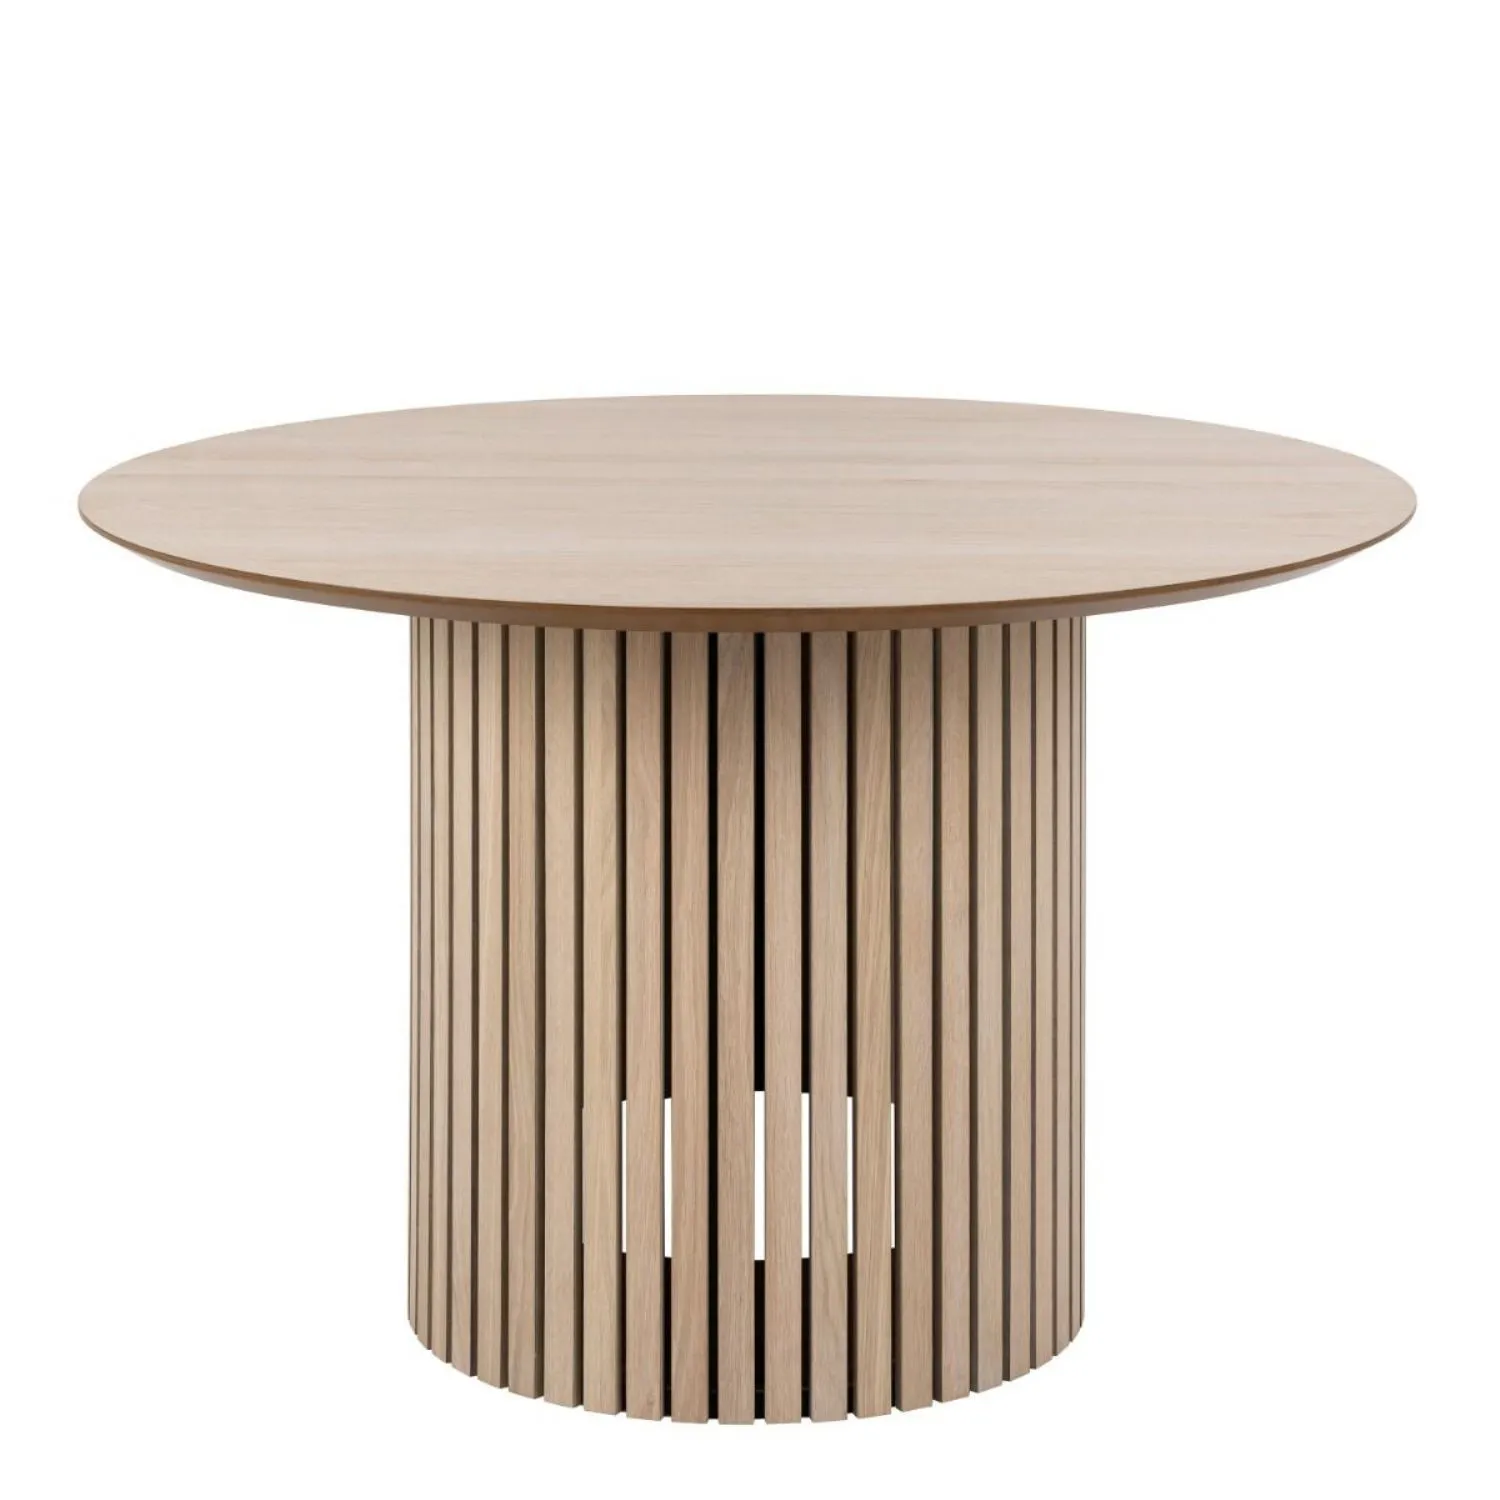 Linley Round Dining Table in White Oak